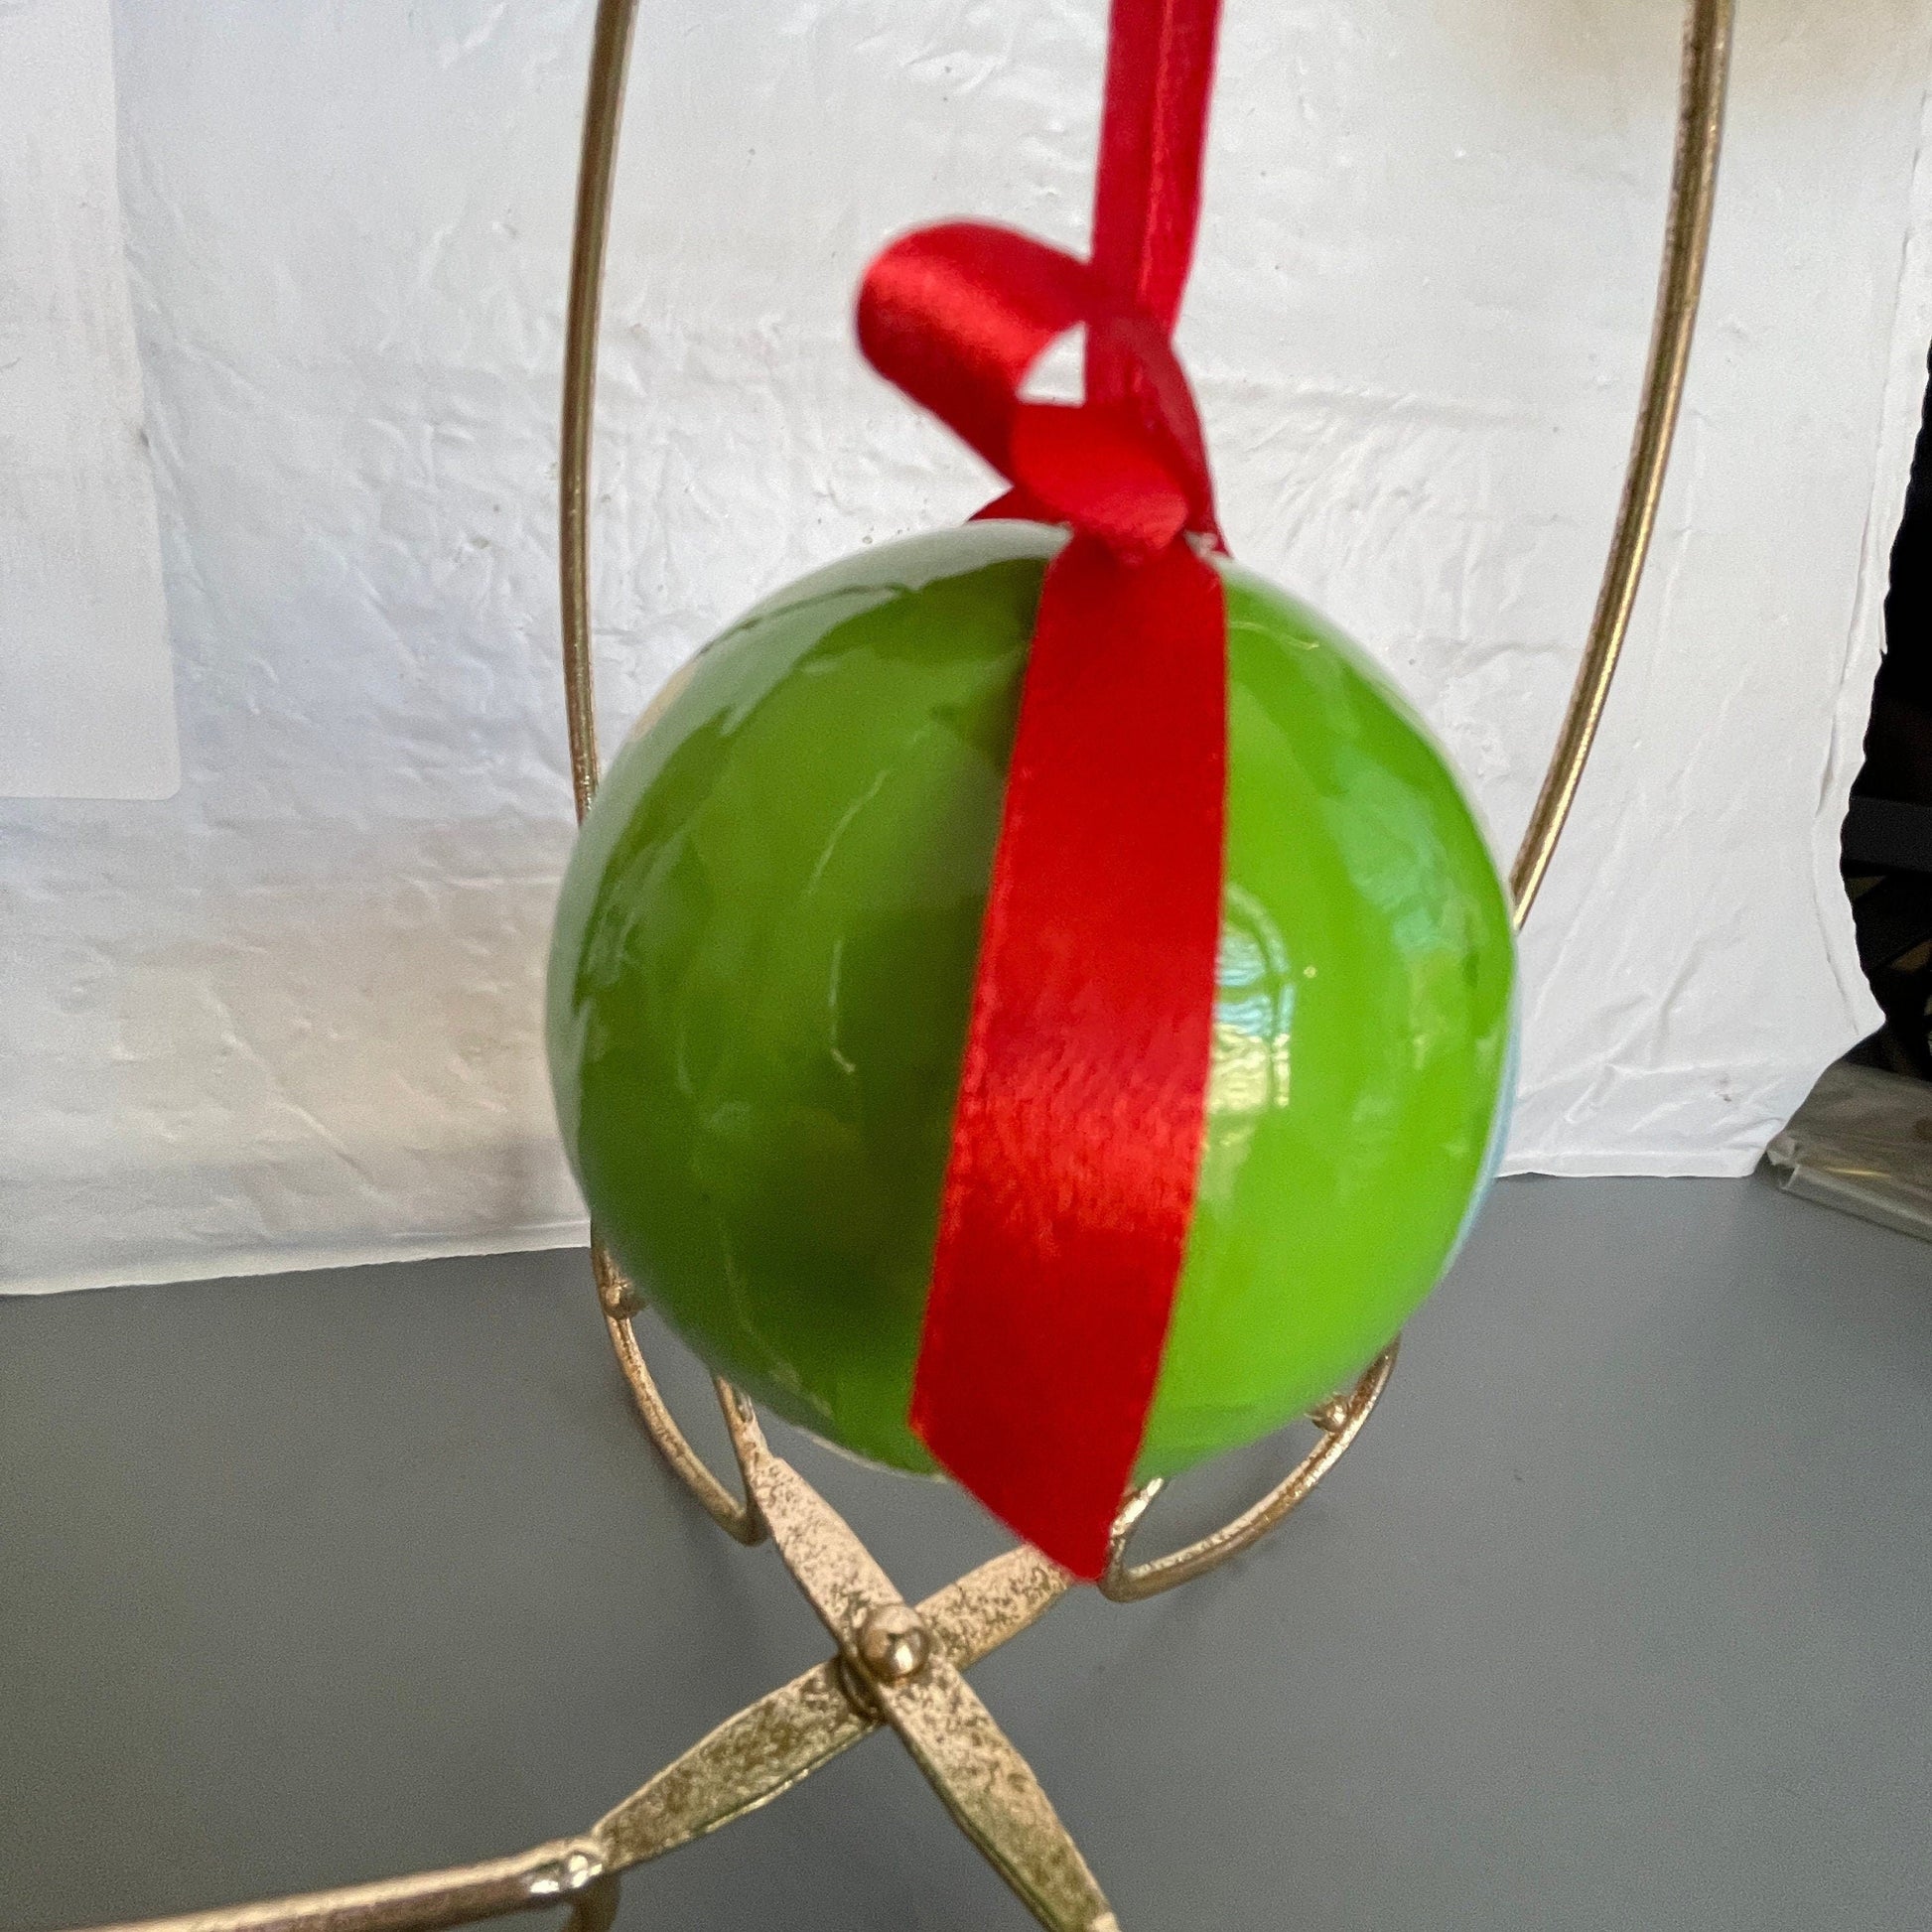 Dad Elf Green Plastic Ball Ornament with Red Ribbon Hanger Vintage Christmas Tree Ornament